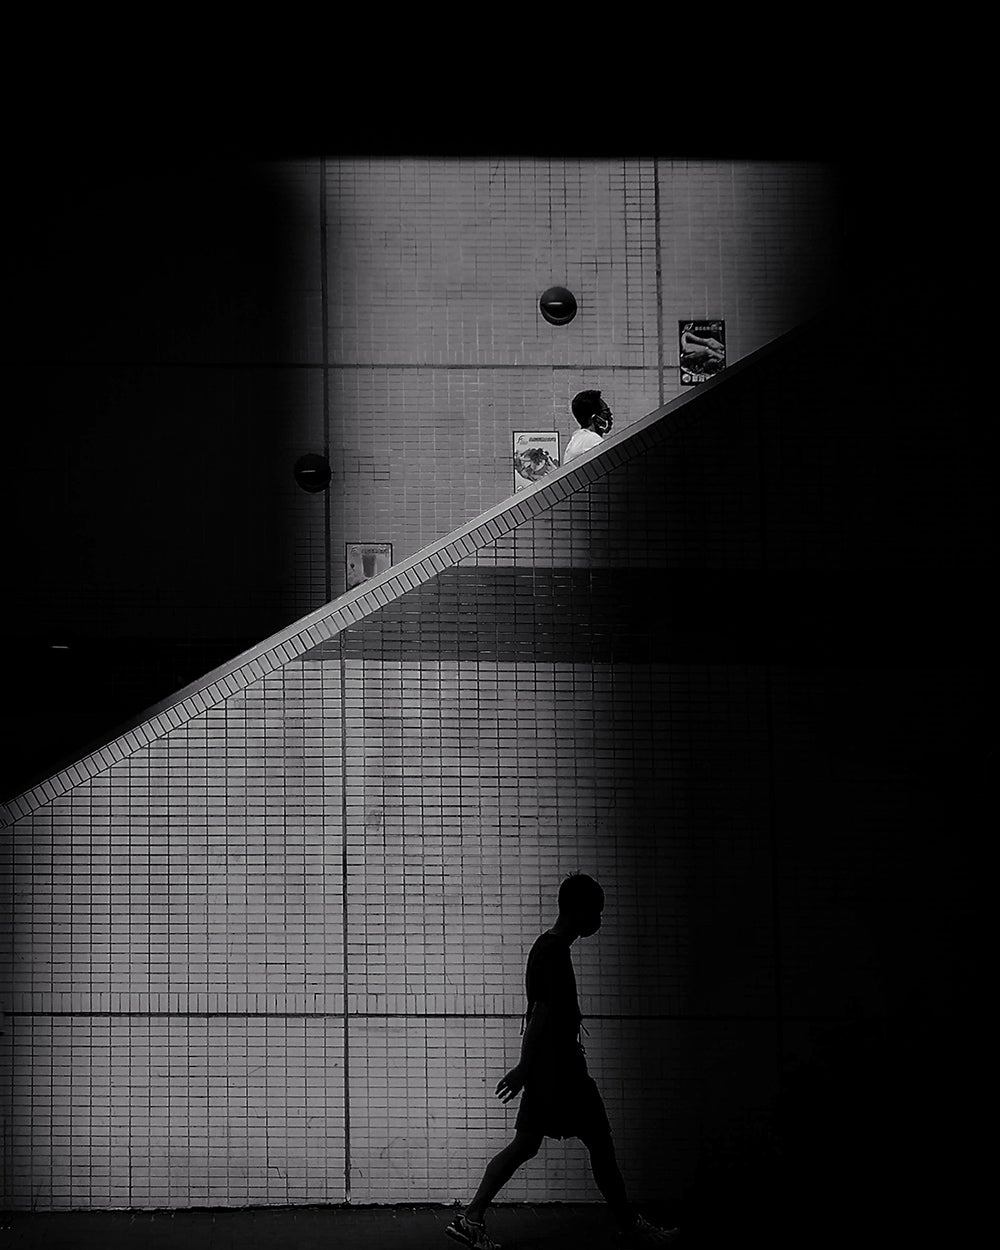 The silhouette of a man walking down the street.